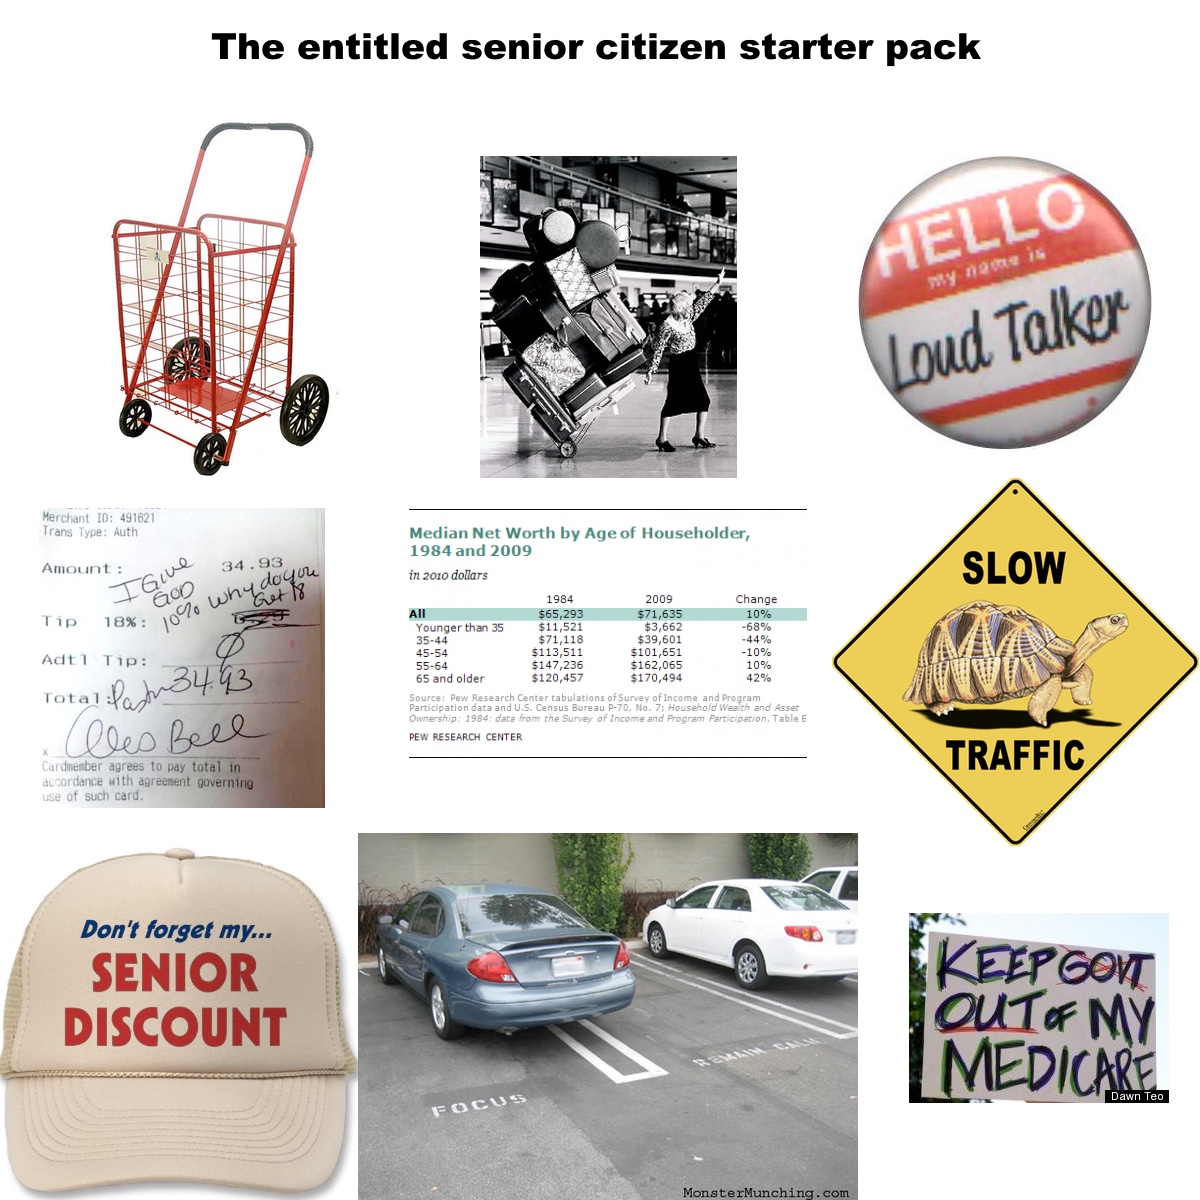 memes - self entitled starter pack - The entitled senior citizen starter pack Hello Loud Talker Merchant Id 491621 Trans Type Auth Amount 34.93 34. Slow Towe 200 Tip Median Net Worth by Age of Householder, 1984 and 2009 in 2010 dollars 1984 2009 Change Al